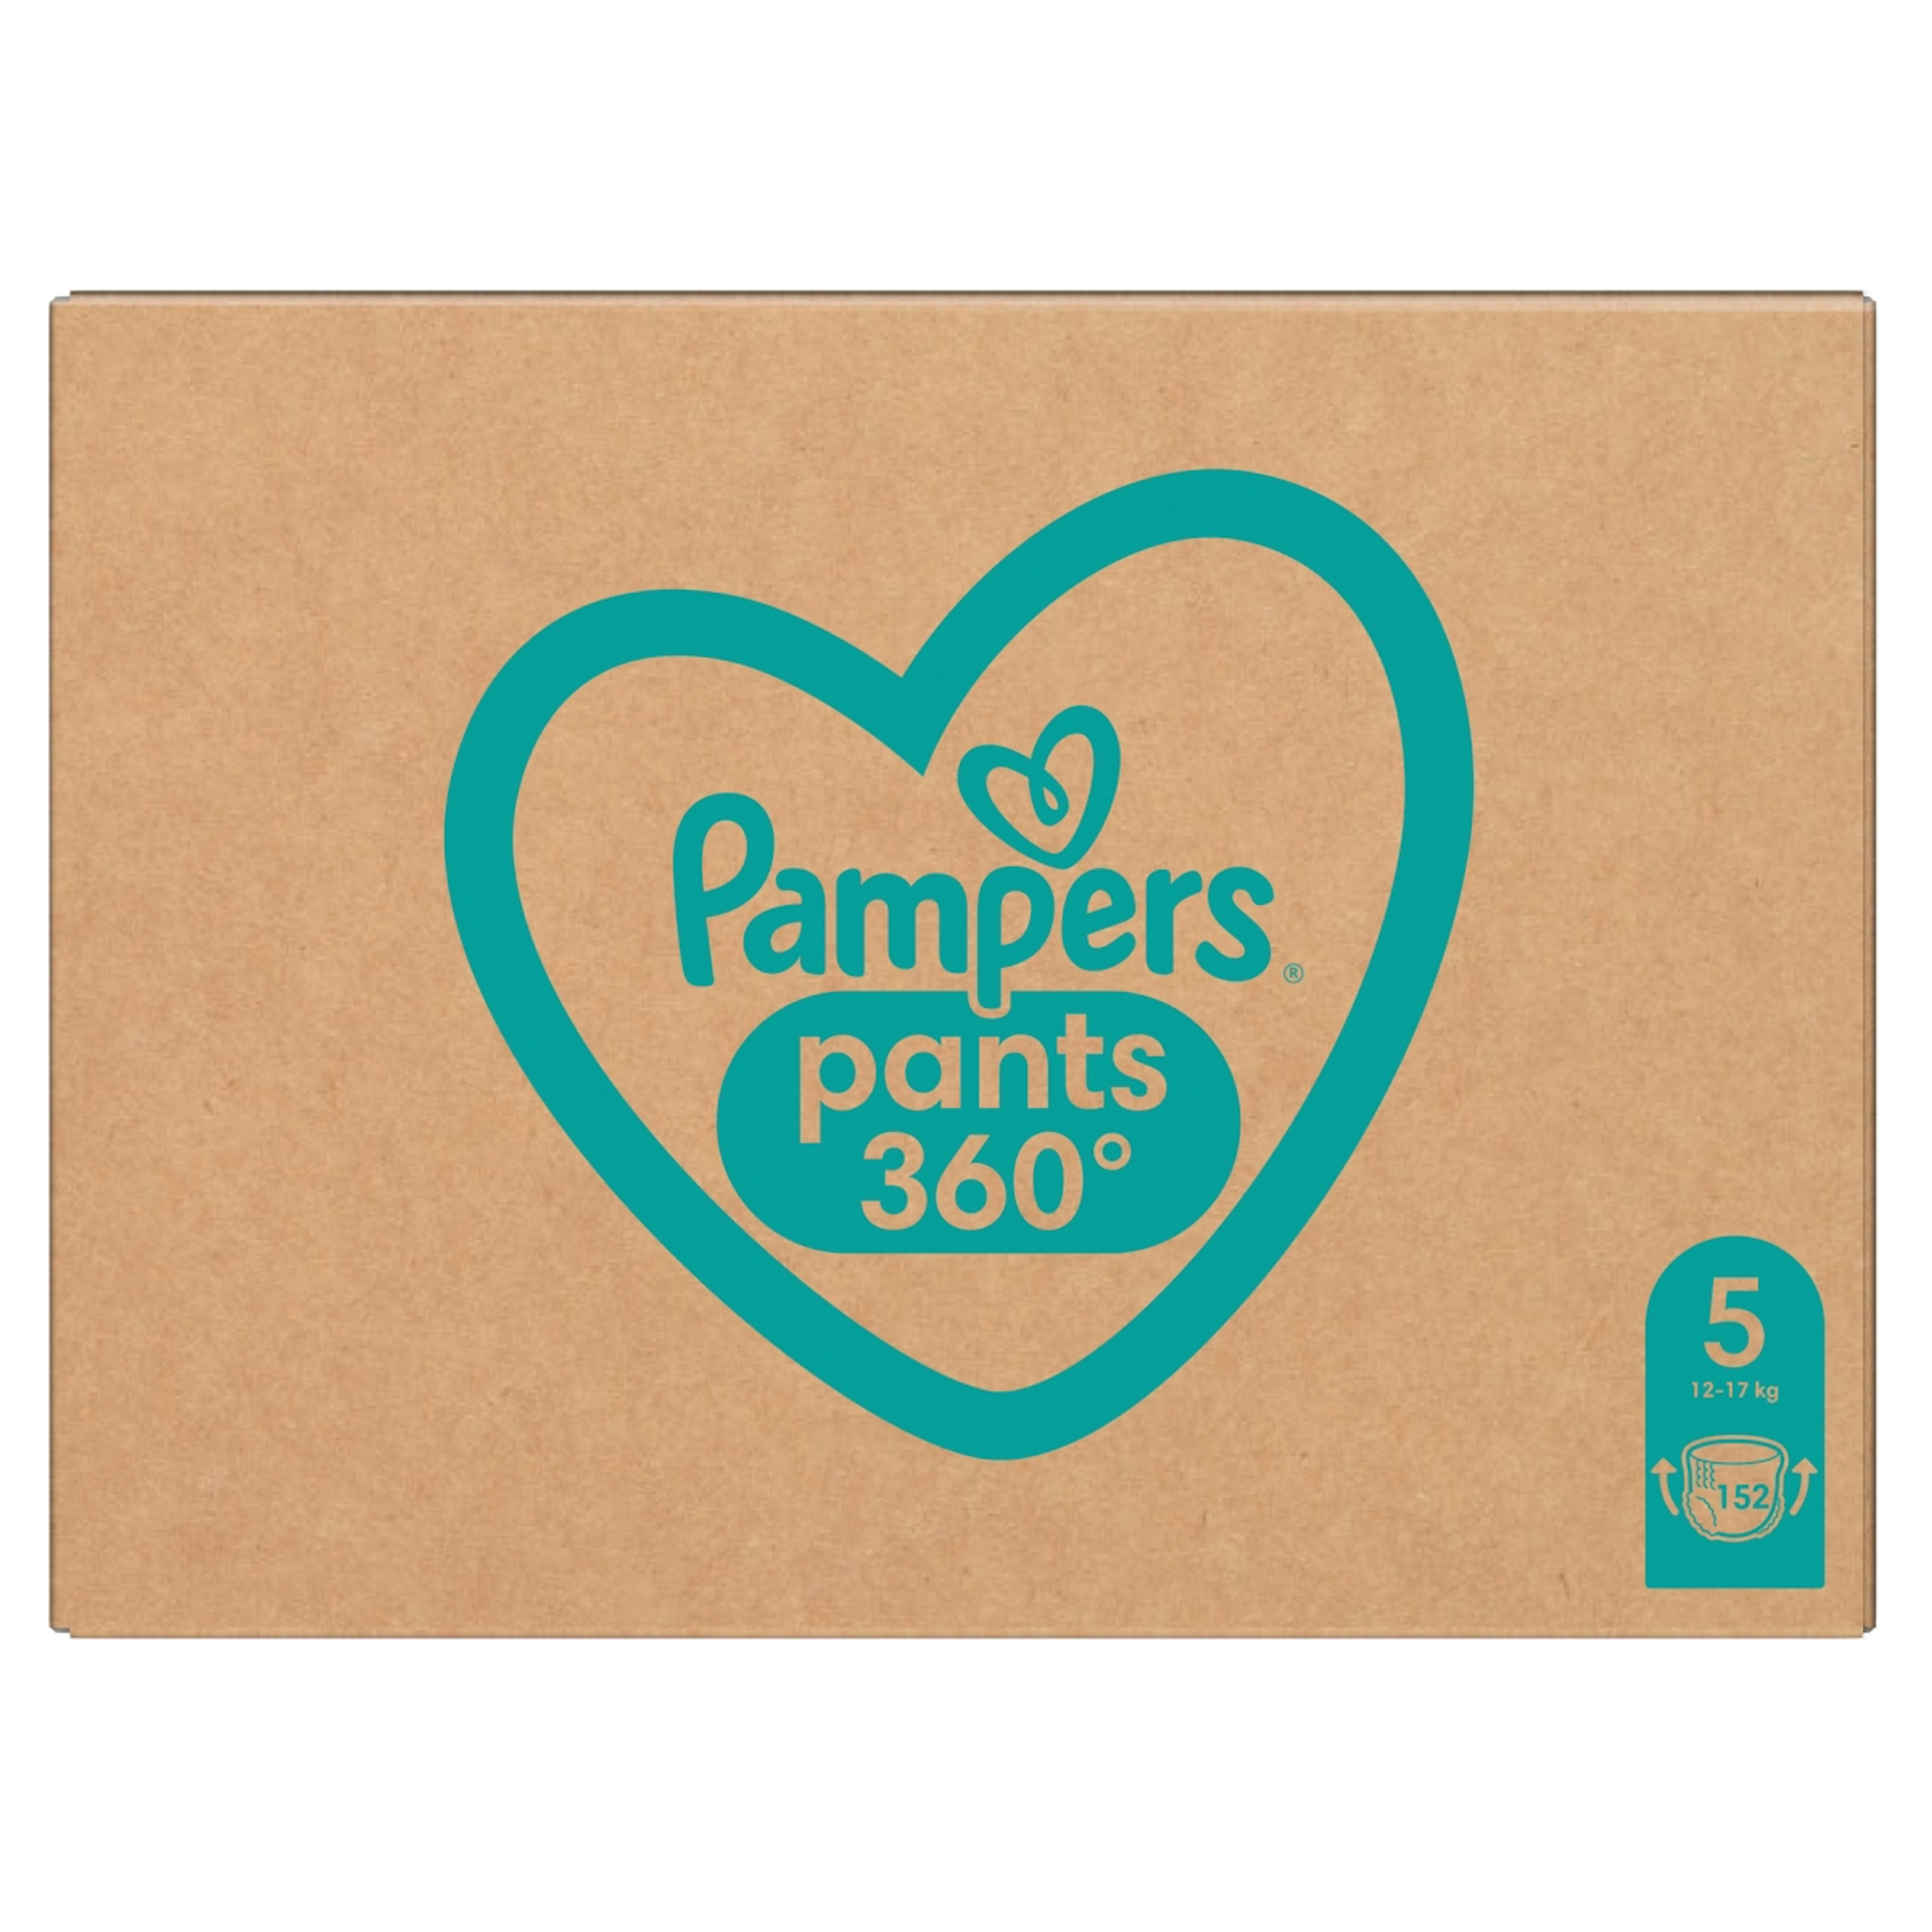 Pampers Pants monthly pack 5-os 12-17 kg - 152 db